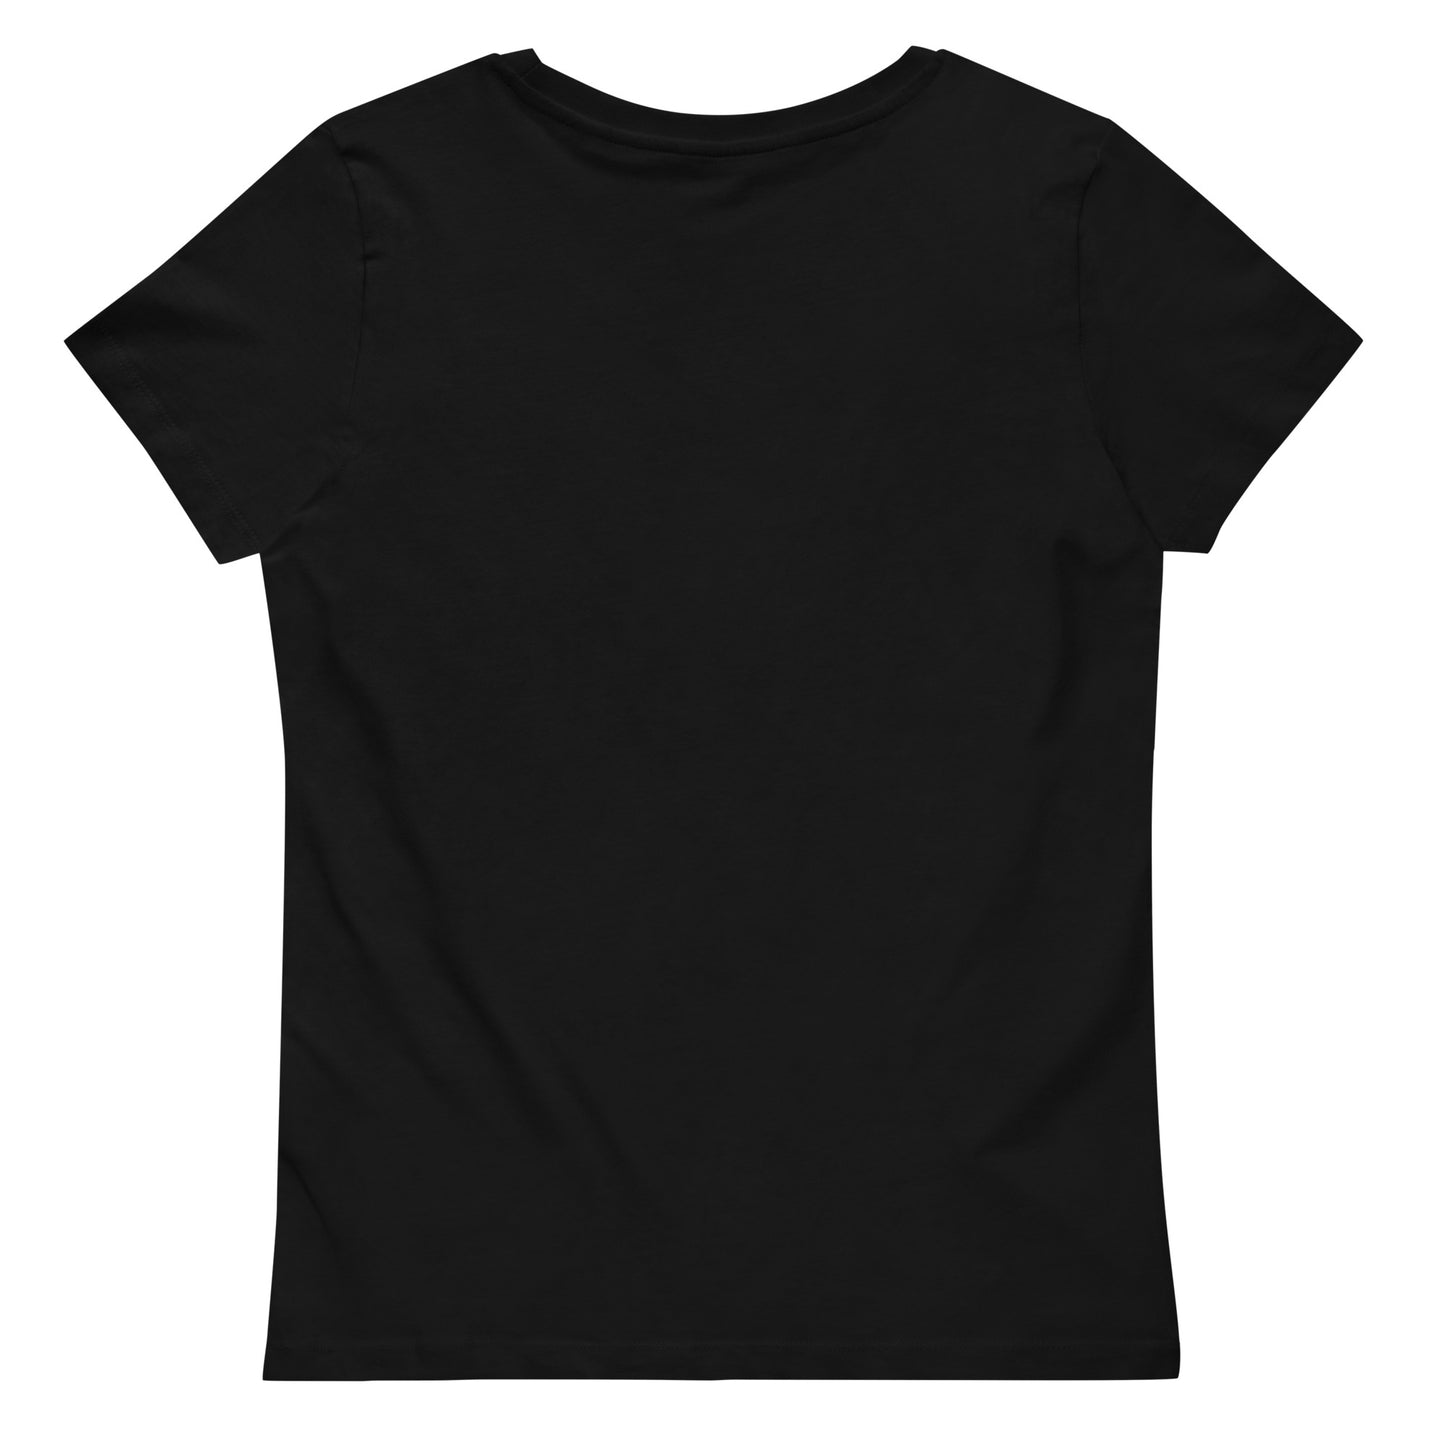 Dreamchaser Women's Fitted Tee